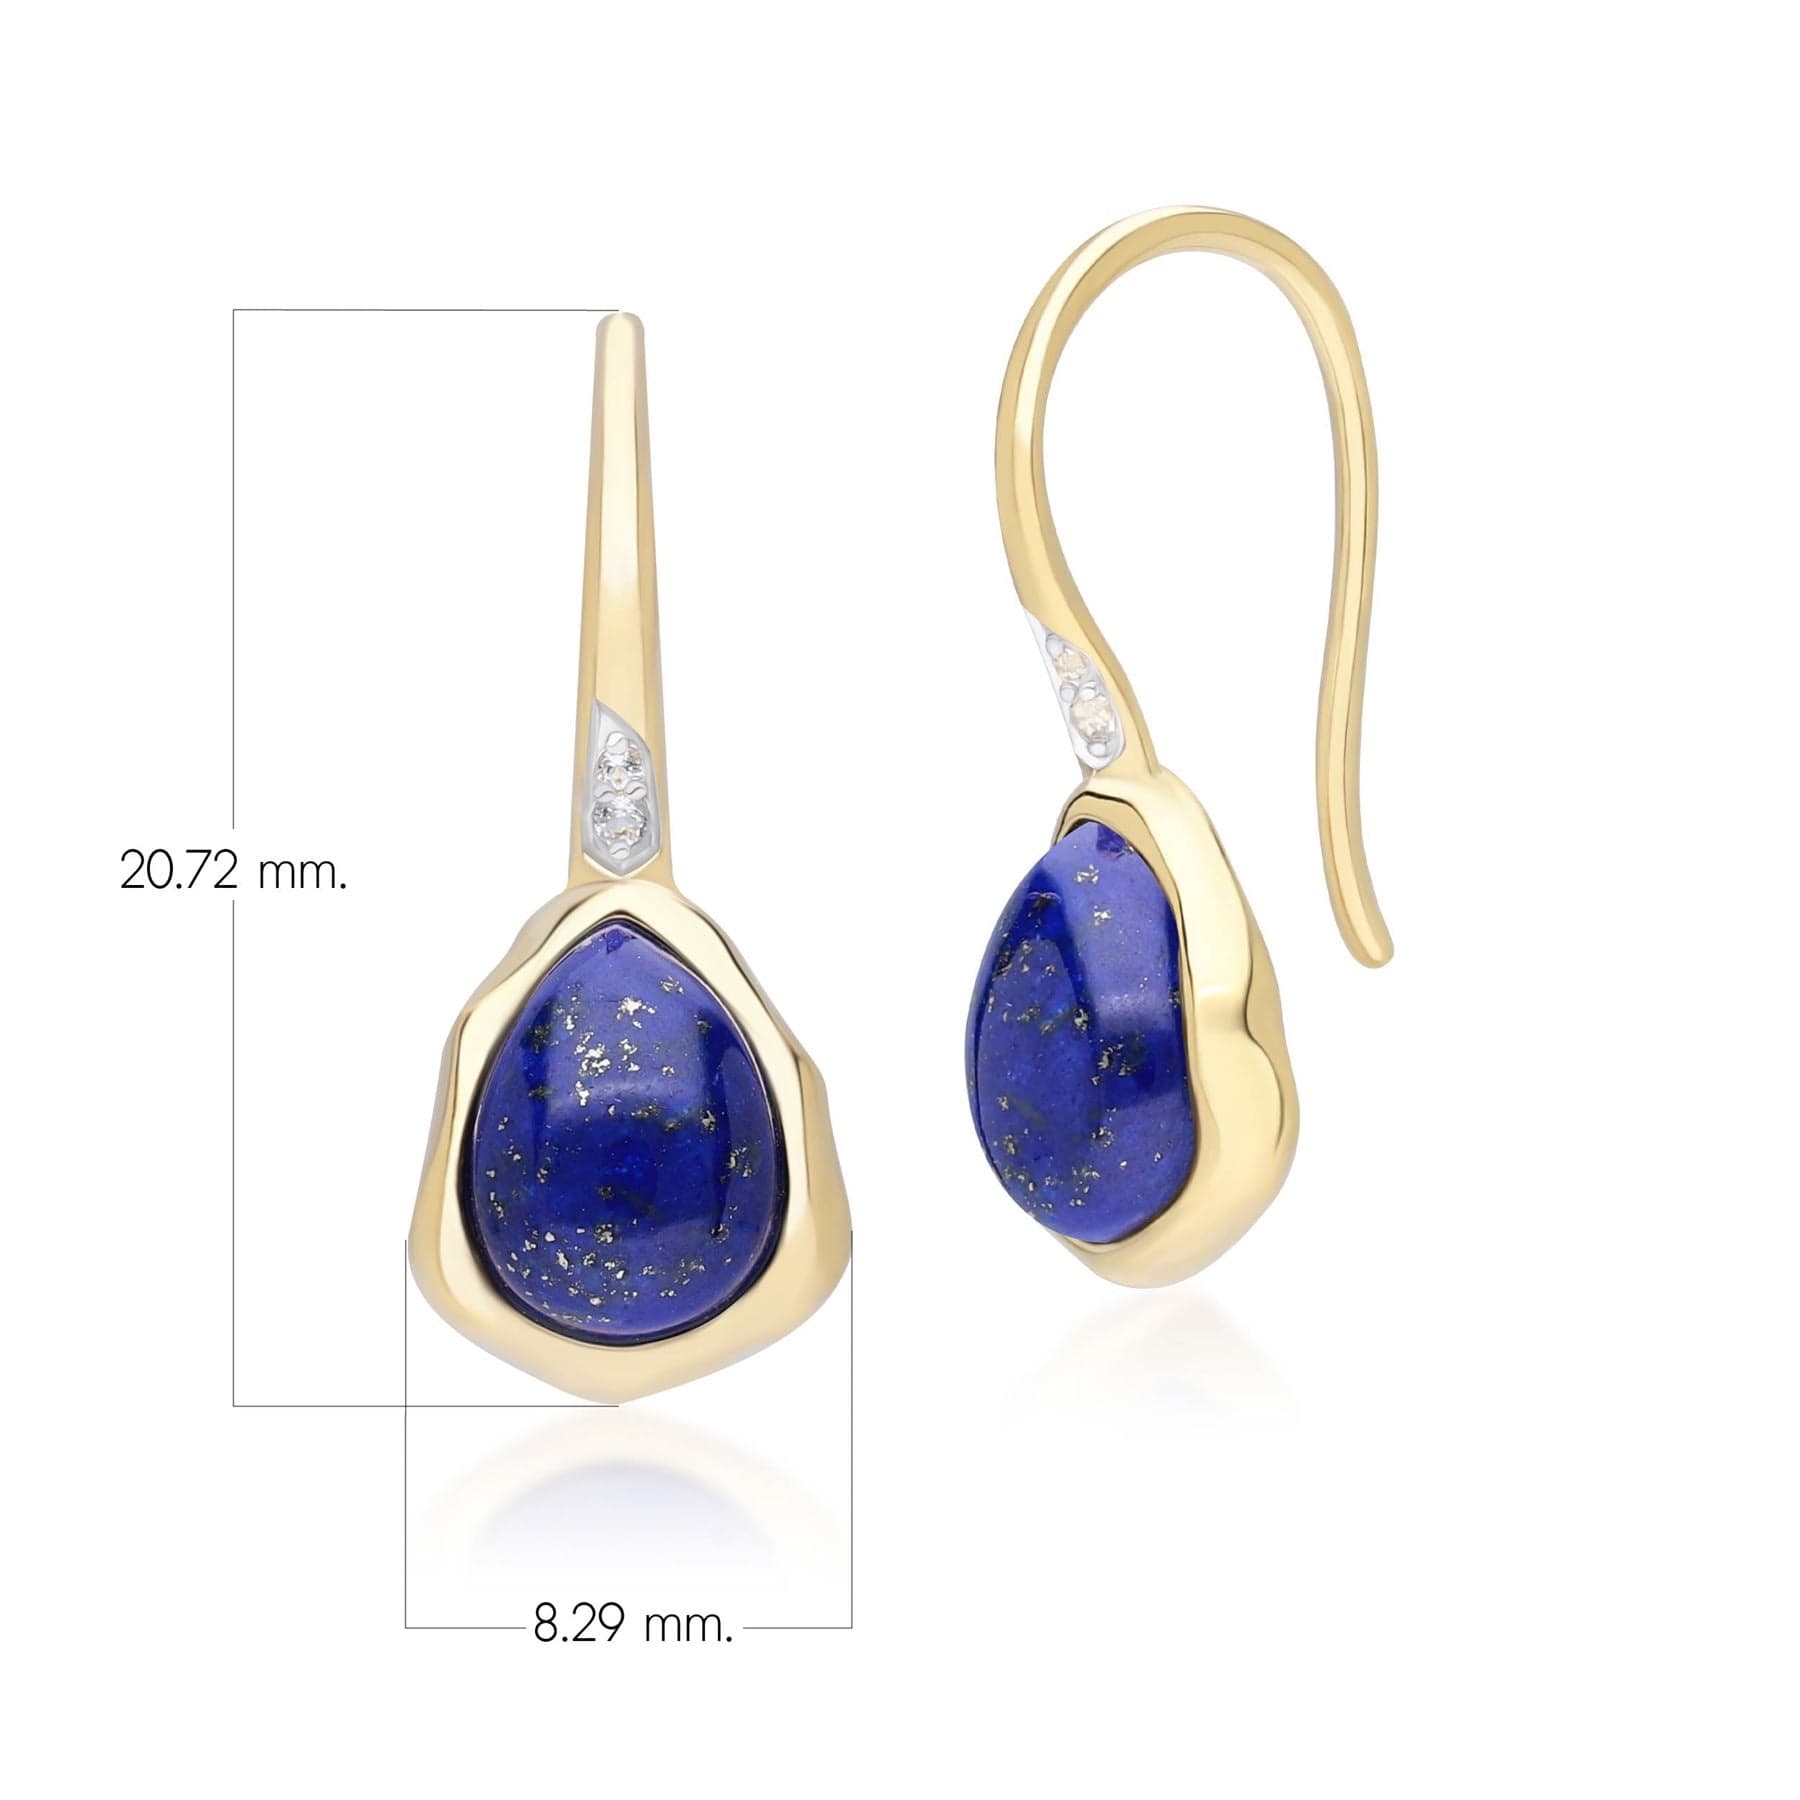 253E418702925 Irregular Lapis Lazuli & Topaz  Drop Earrings In 18ct Gold Plated SterlIng Silver Dimensions